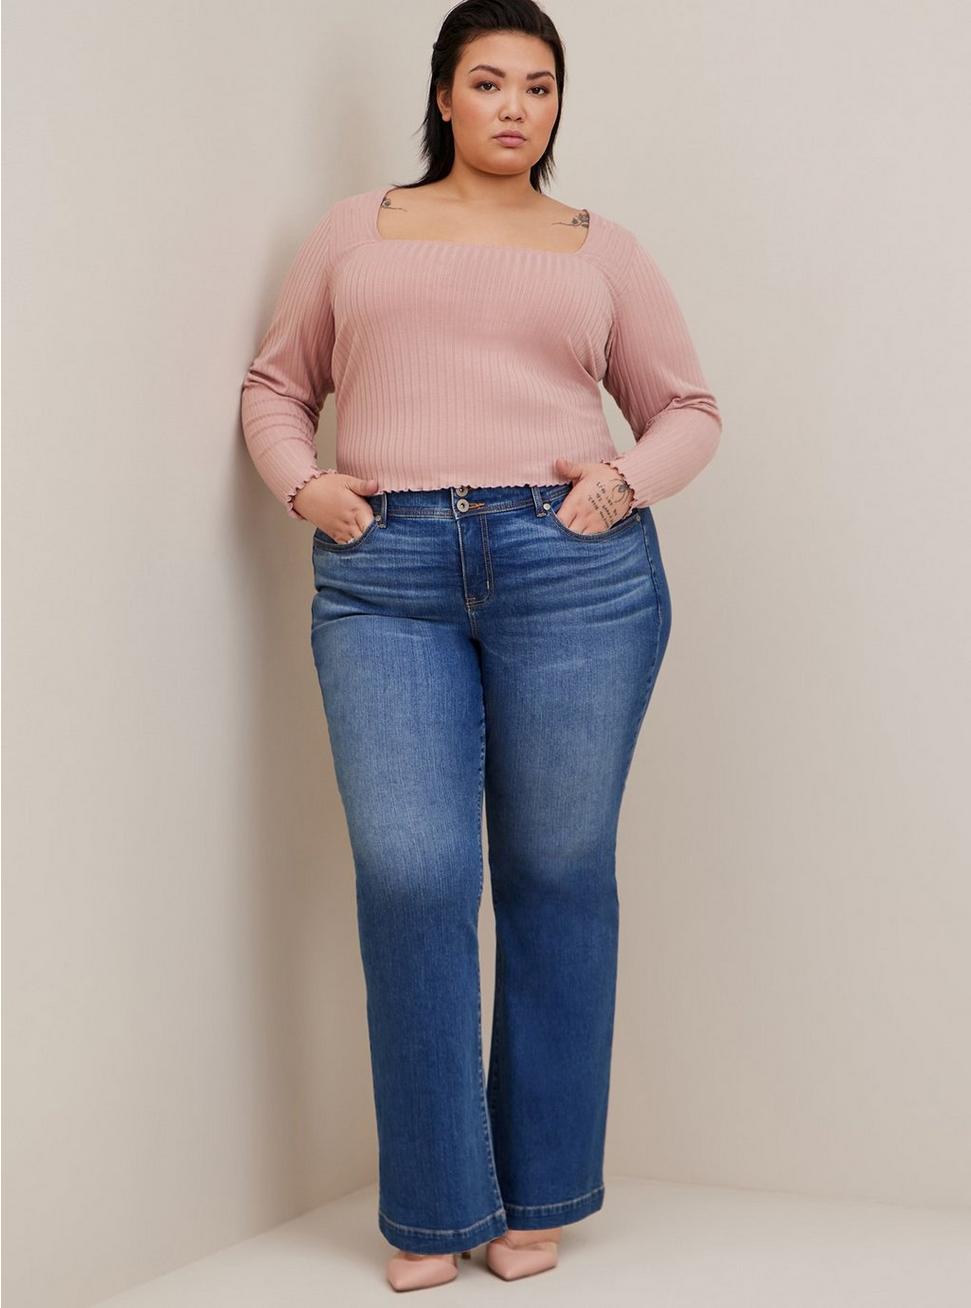 Knit Rib Square Neck Long Sleeve Tee, DUSTY PINK, hi-res